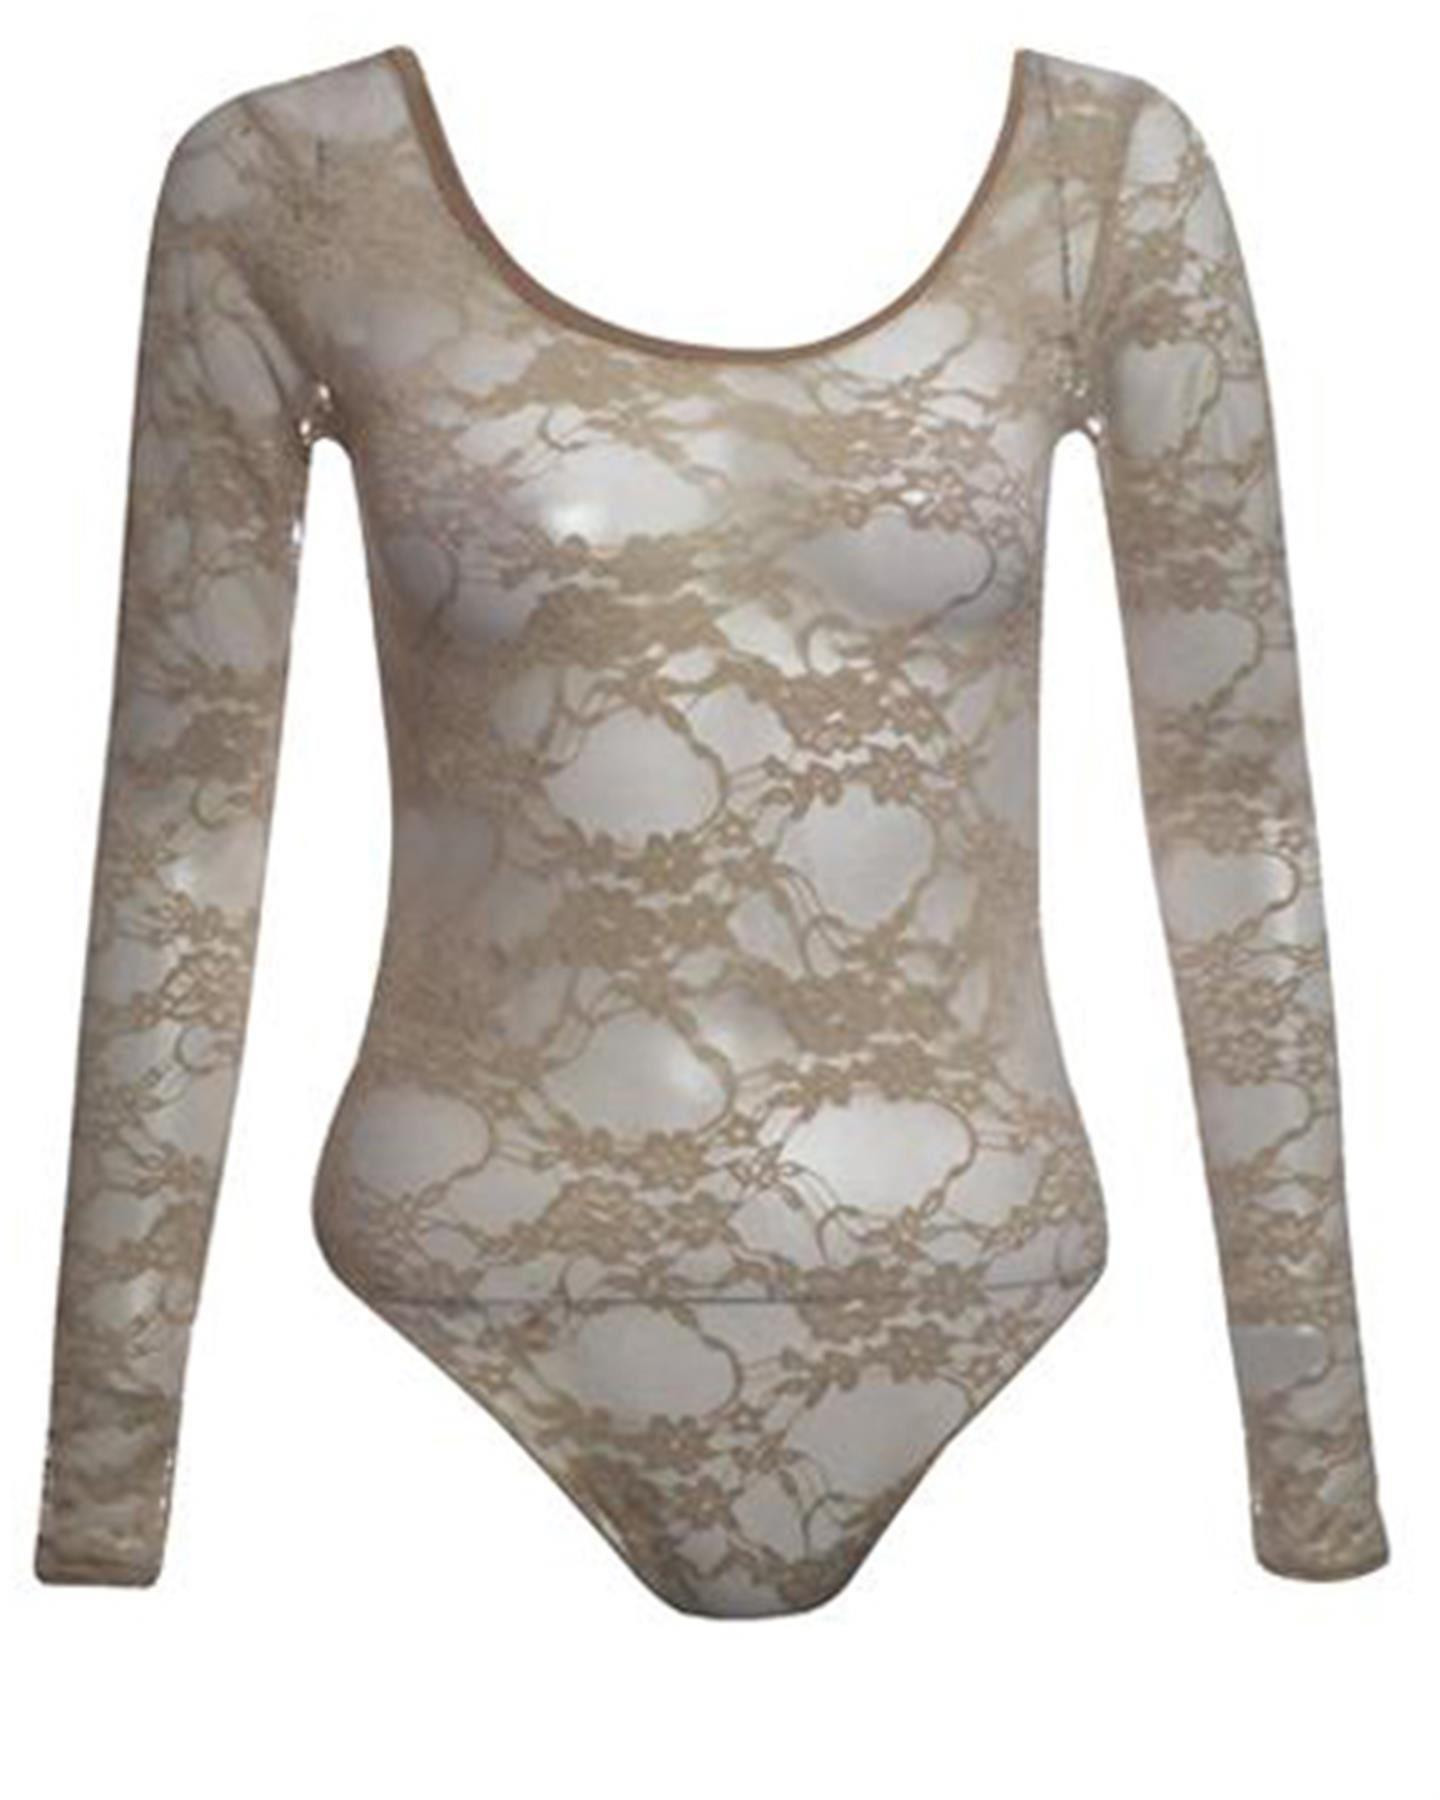 Nel Floral Lace Full Sleeve Leotard Bodysuits Top 8-14 - Spring